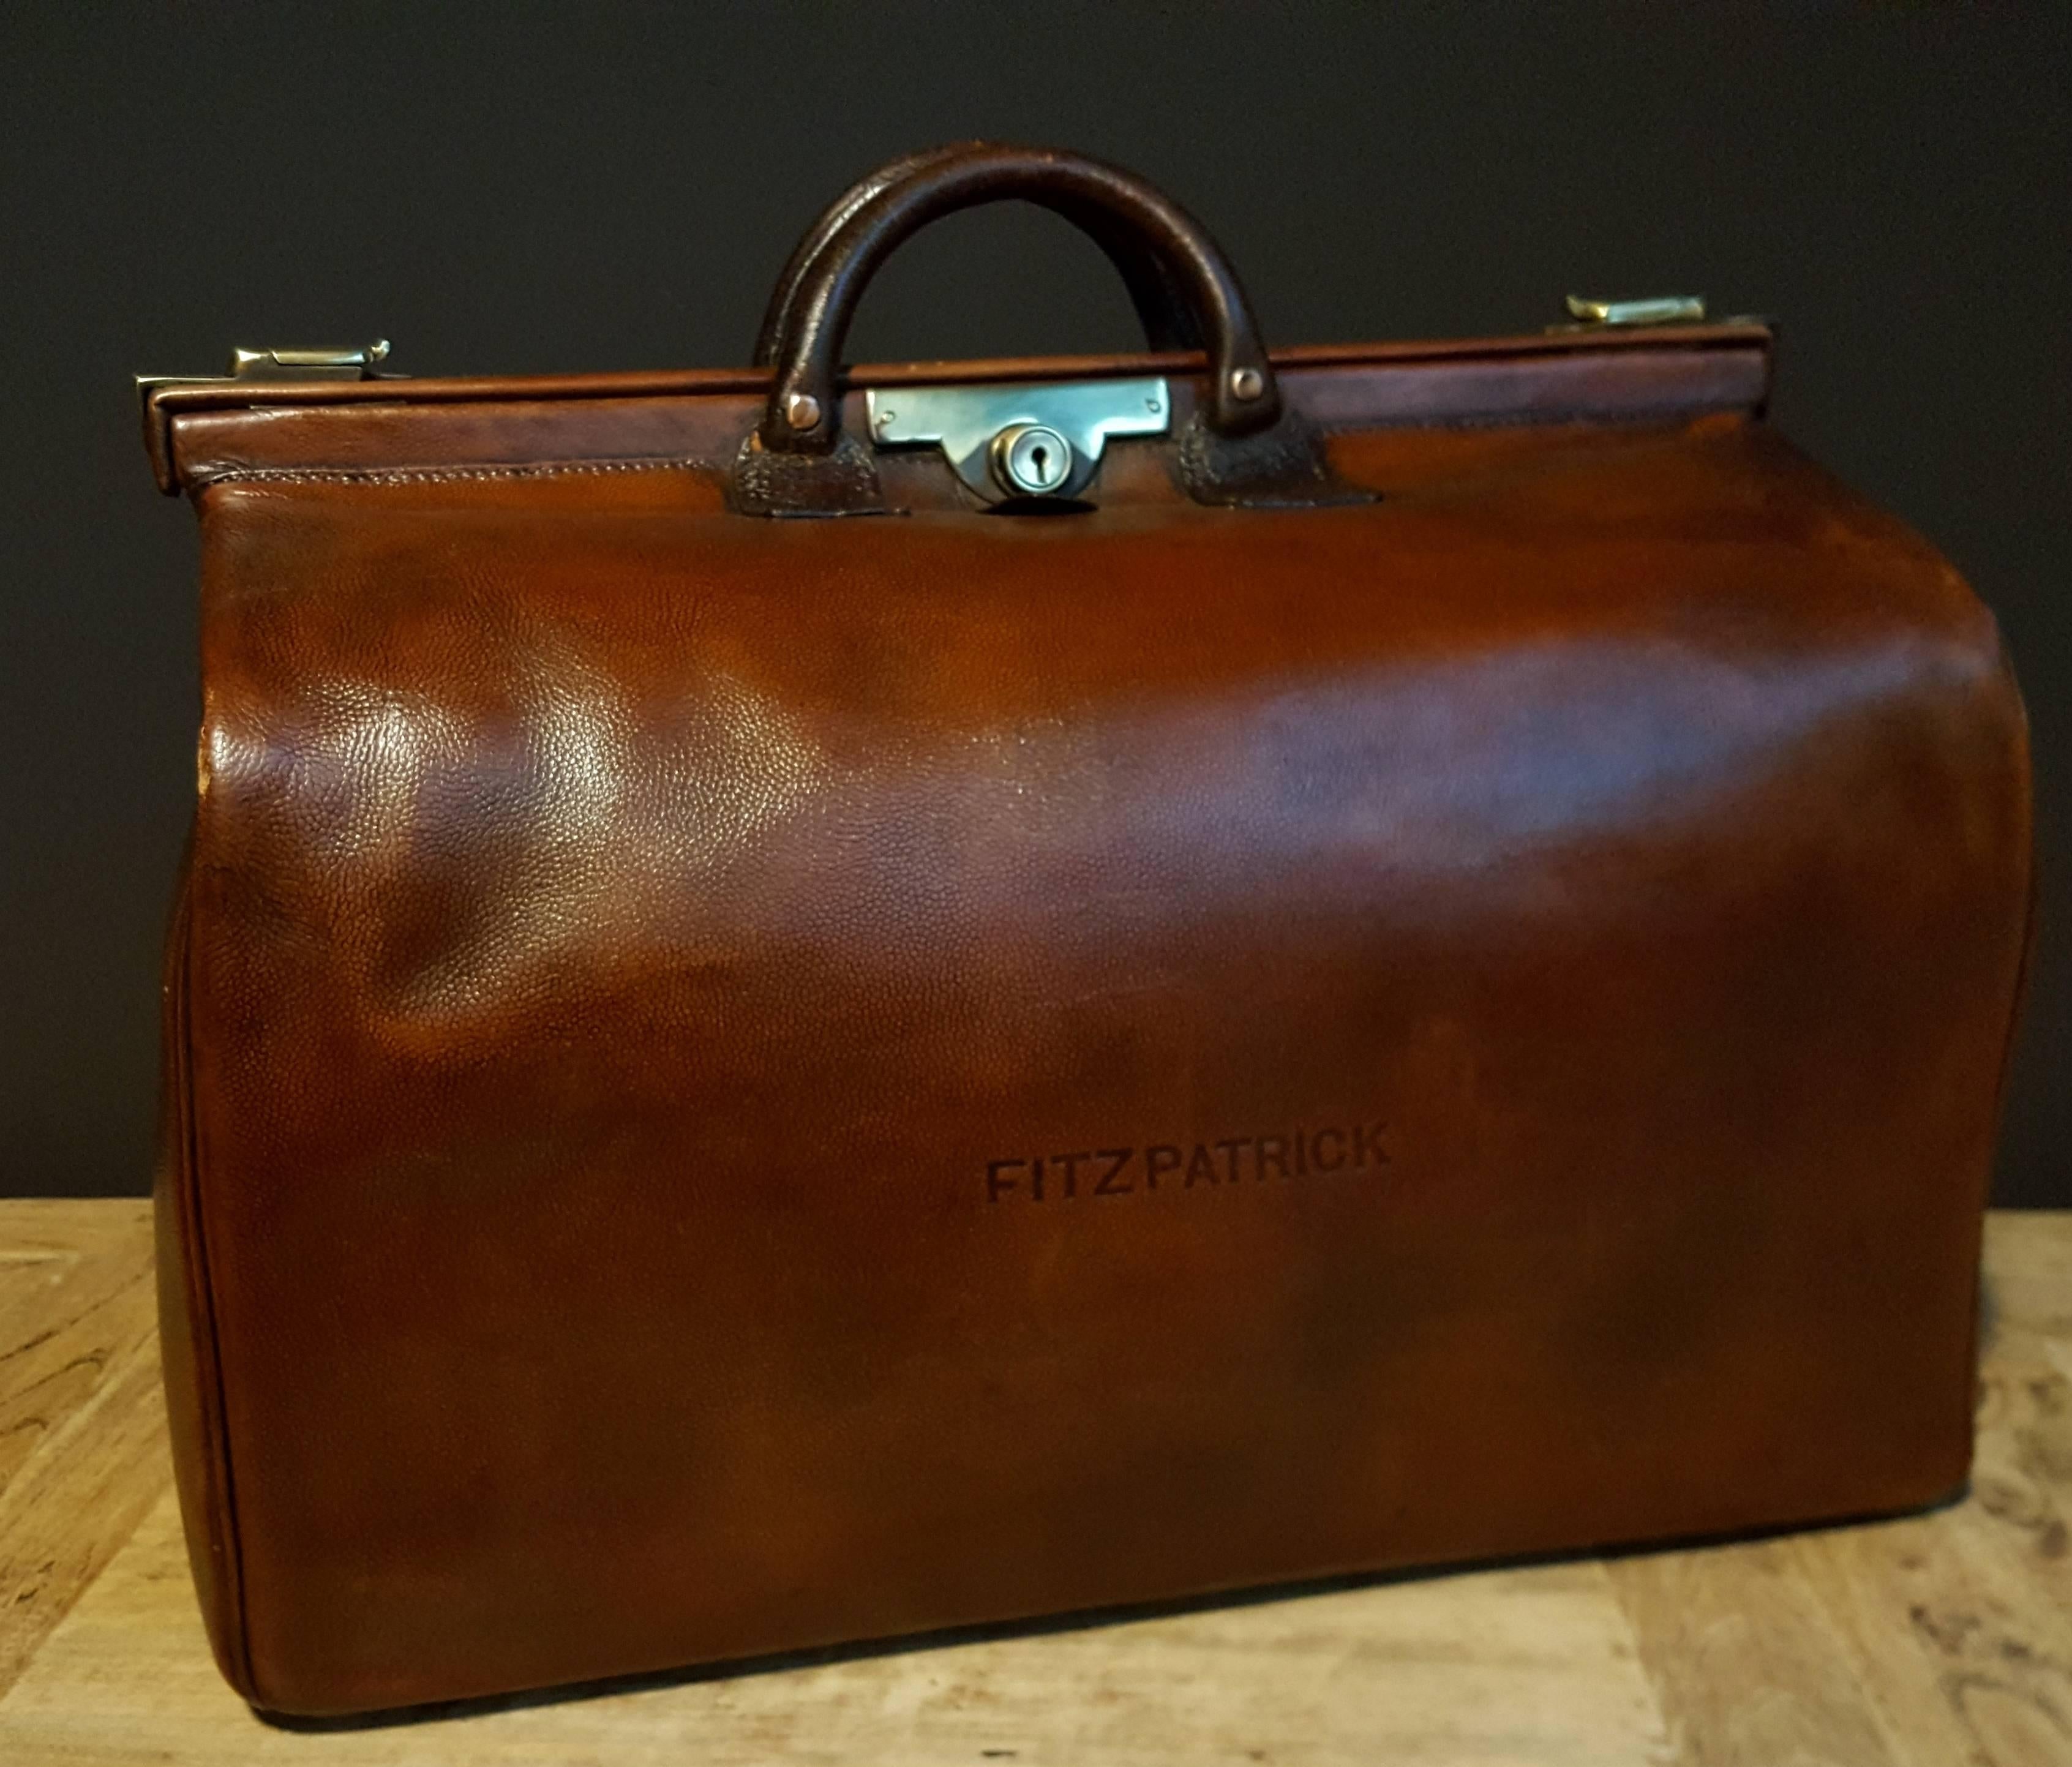 Beautiful leather gladstone bag named after a former UK prime minister.
The bag has the original handle, buckles and secure locks. It has a wonderful patina throughout.
Very good condition, even the bottom of the bag is in a superb